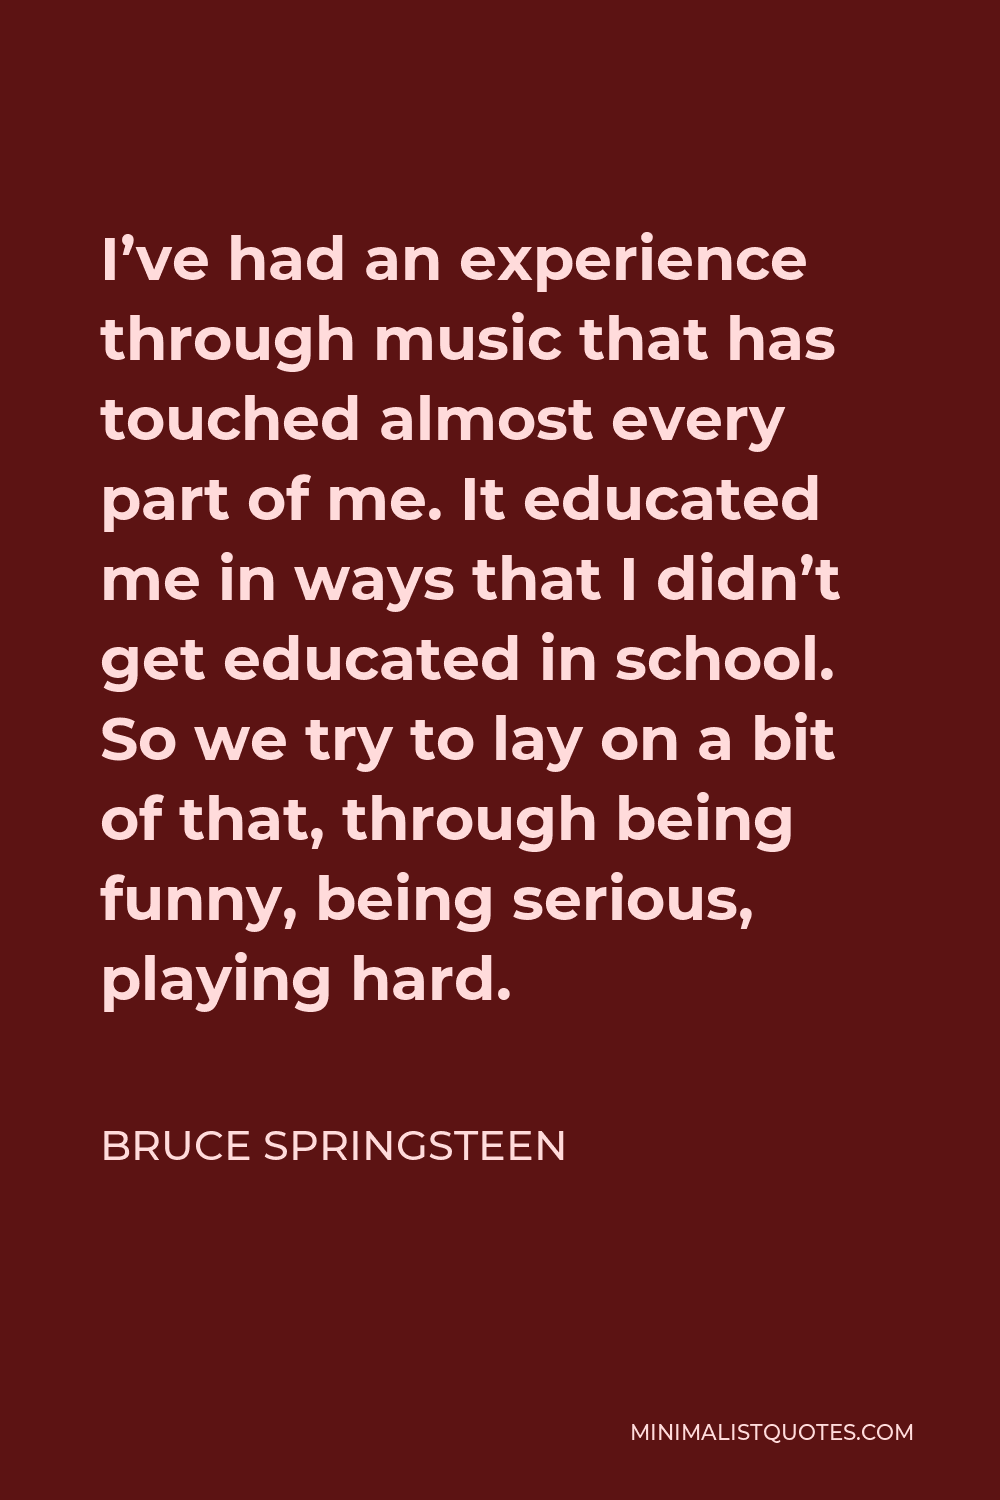 Bruce Springsteen Quote: I've had an experience through music that has  touched almost every part of me. It educated me in ways that I didn't get  educated in school. So we try